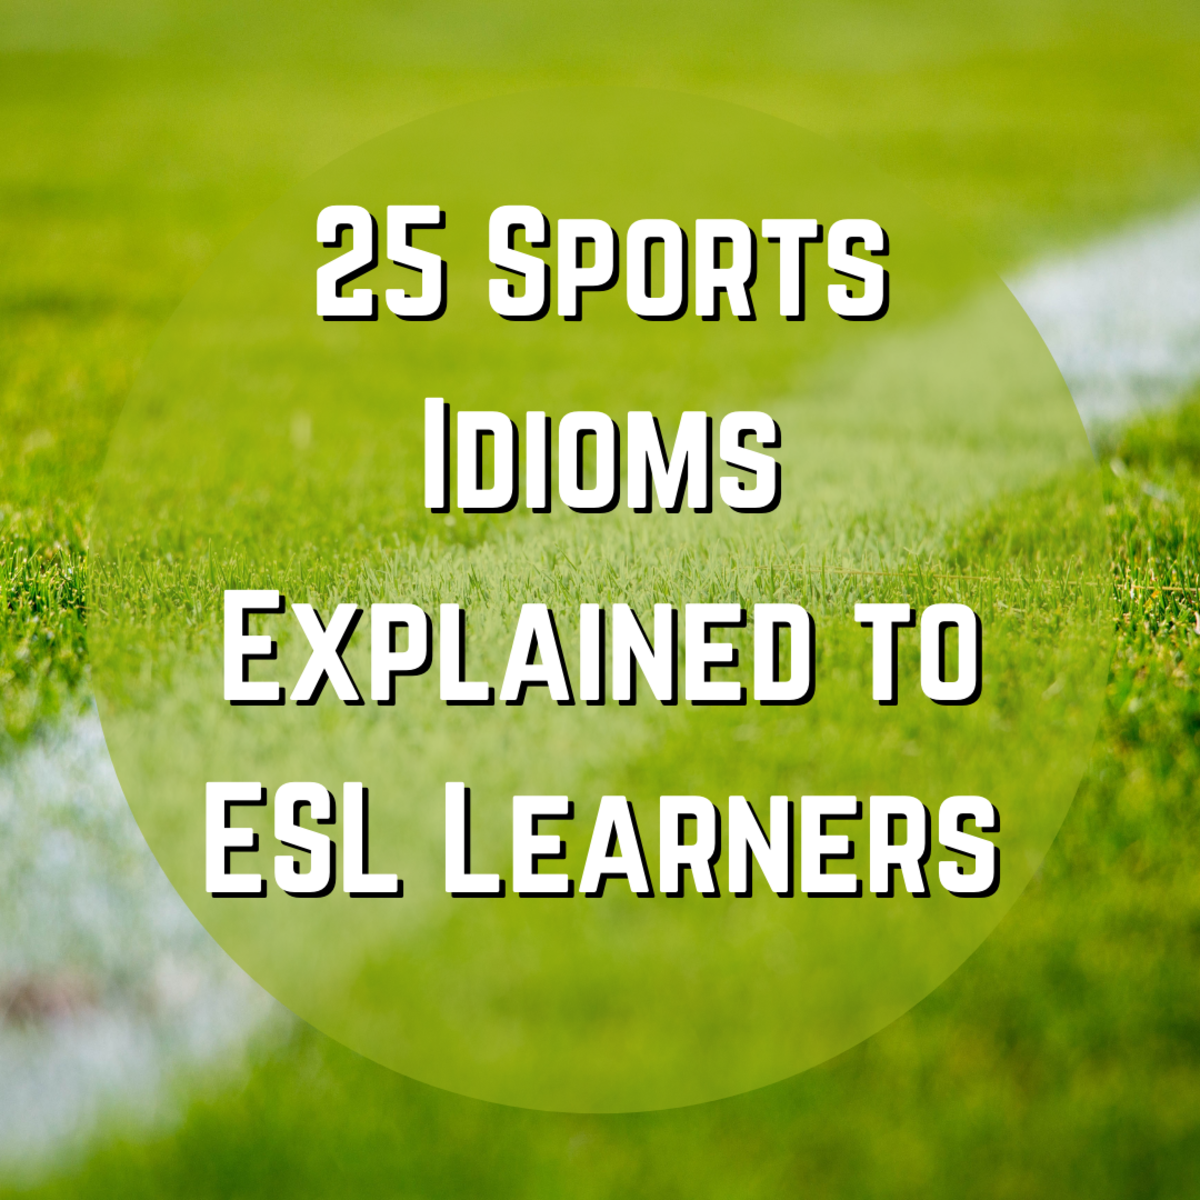 Read on to learn 25 sports-related idioms! As an ESL student, these will help you better understand English-language sports lingo.